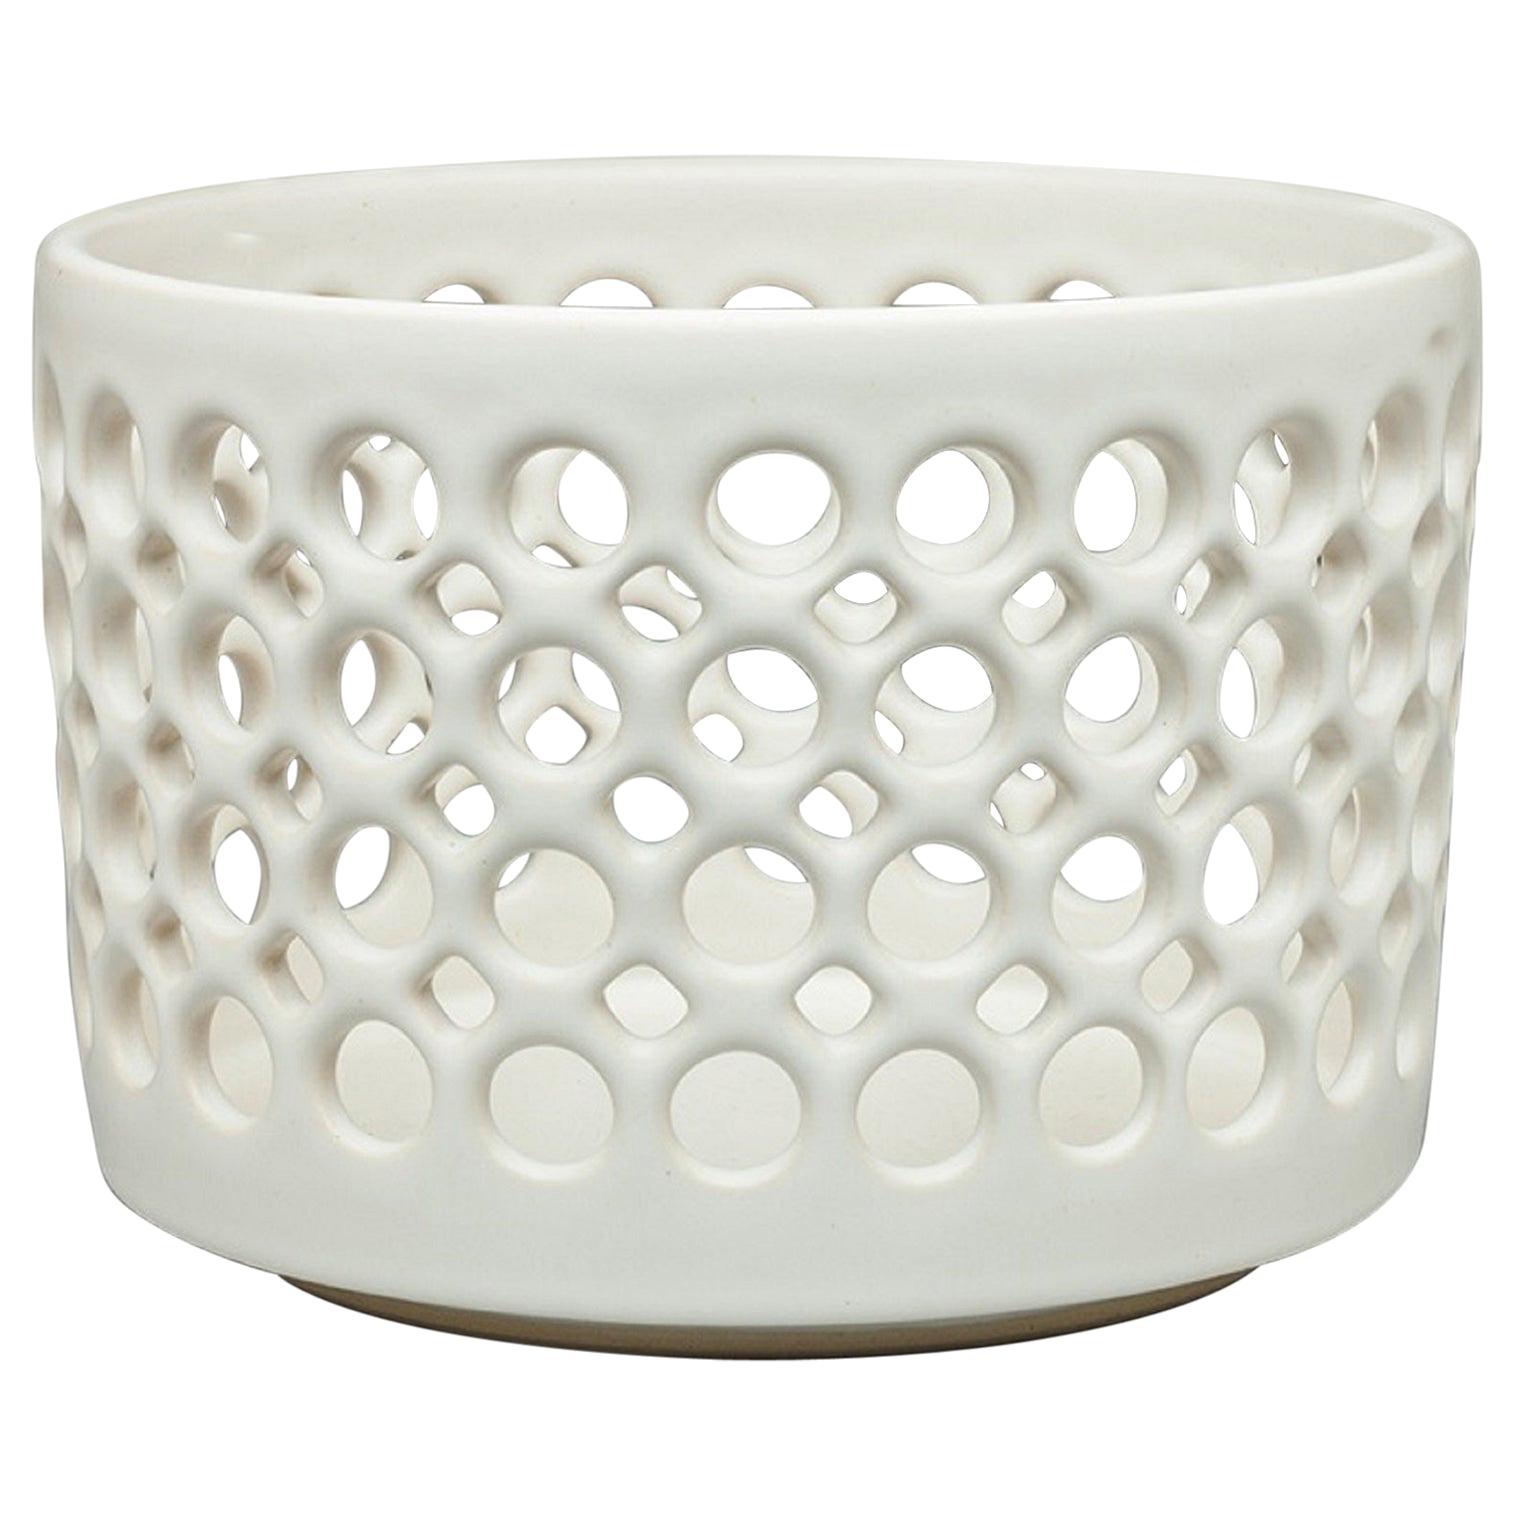 Pierced White Cylindrical Bowl, in Stock